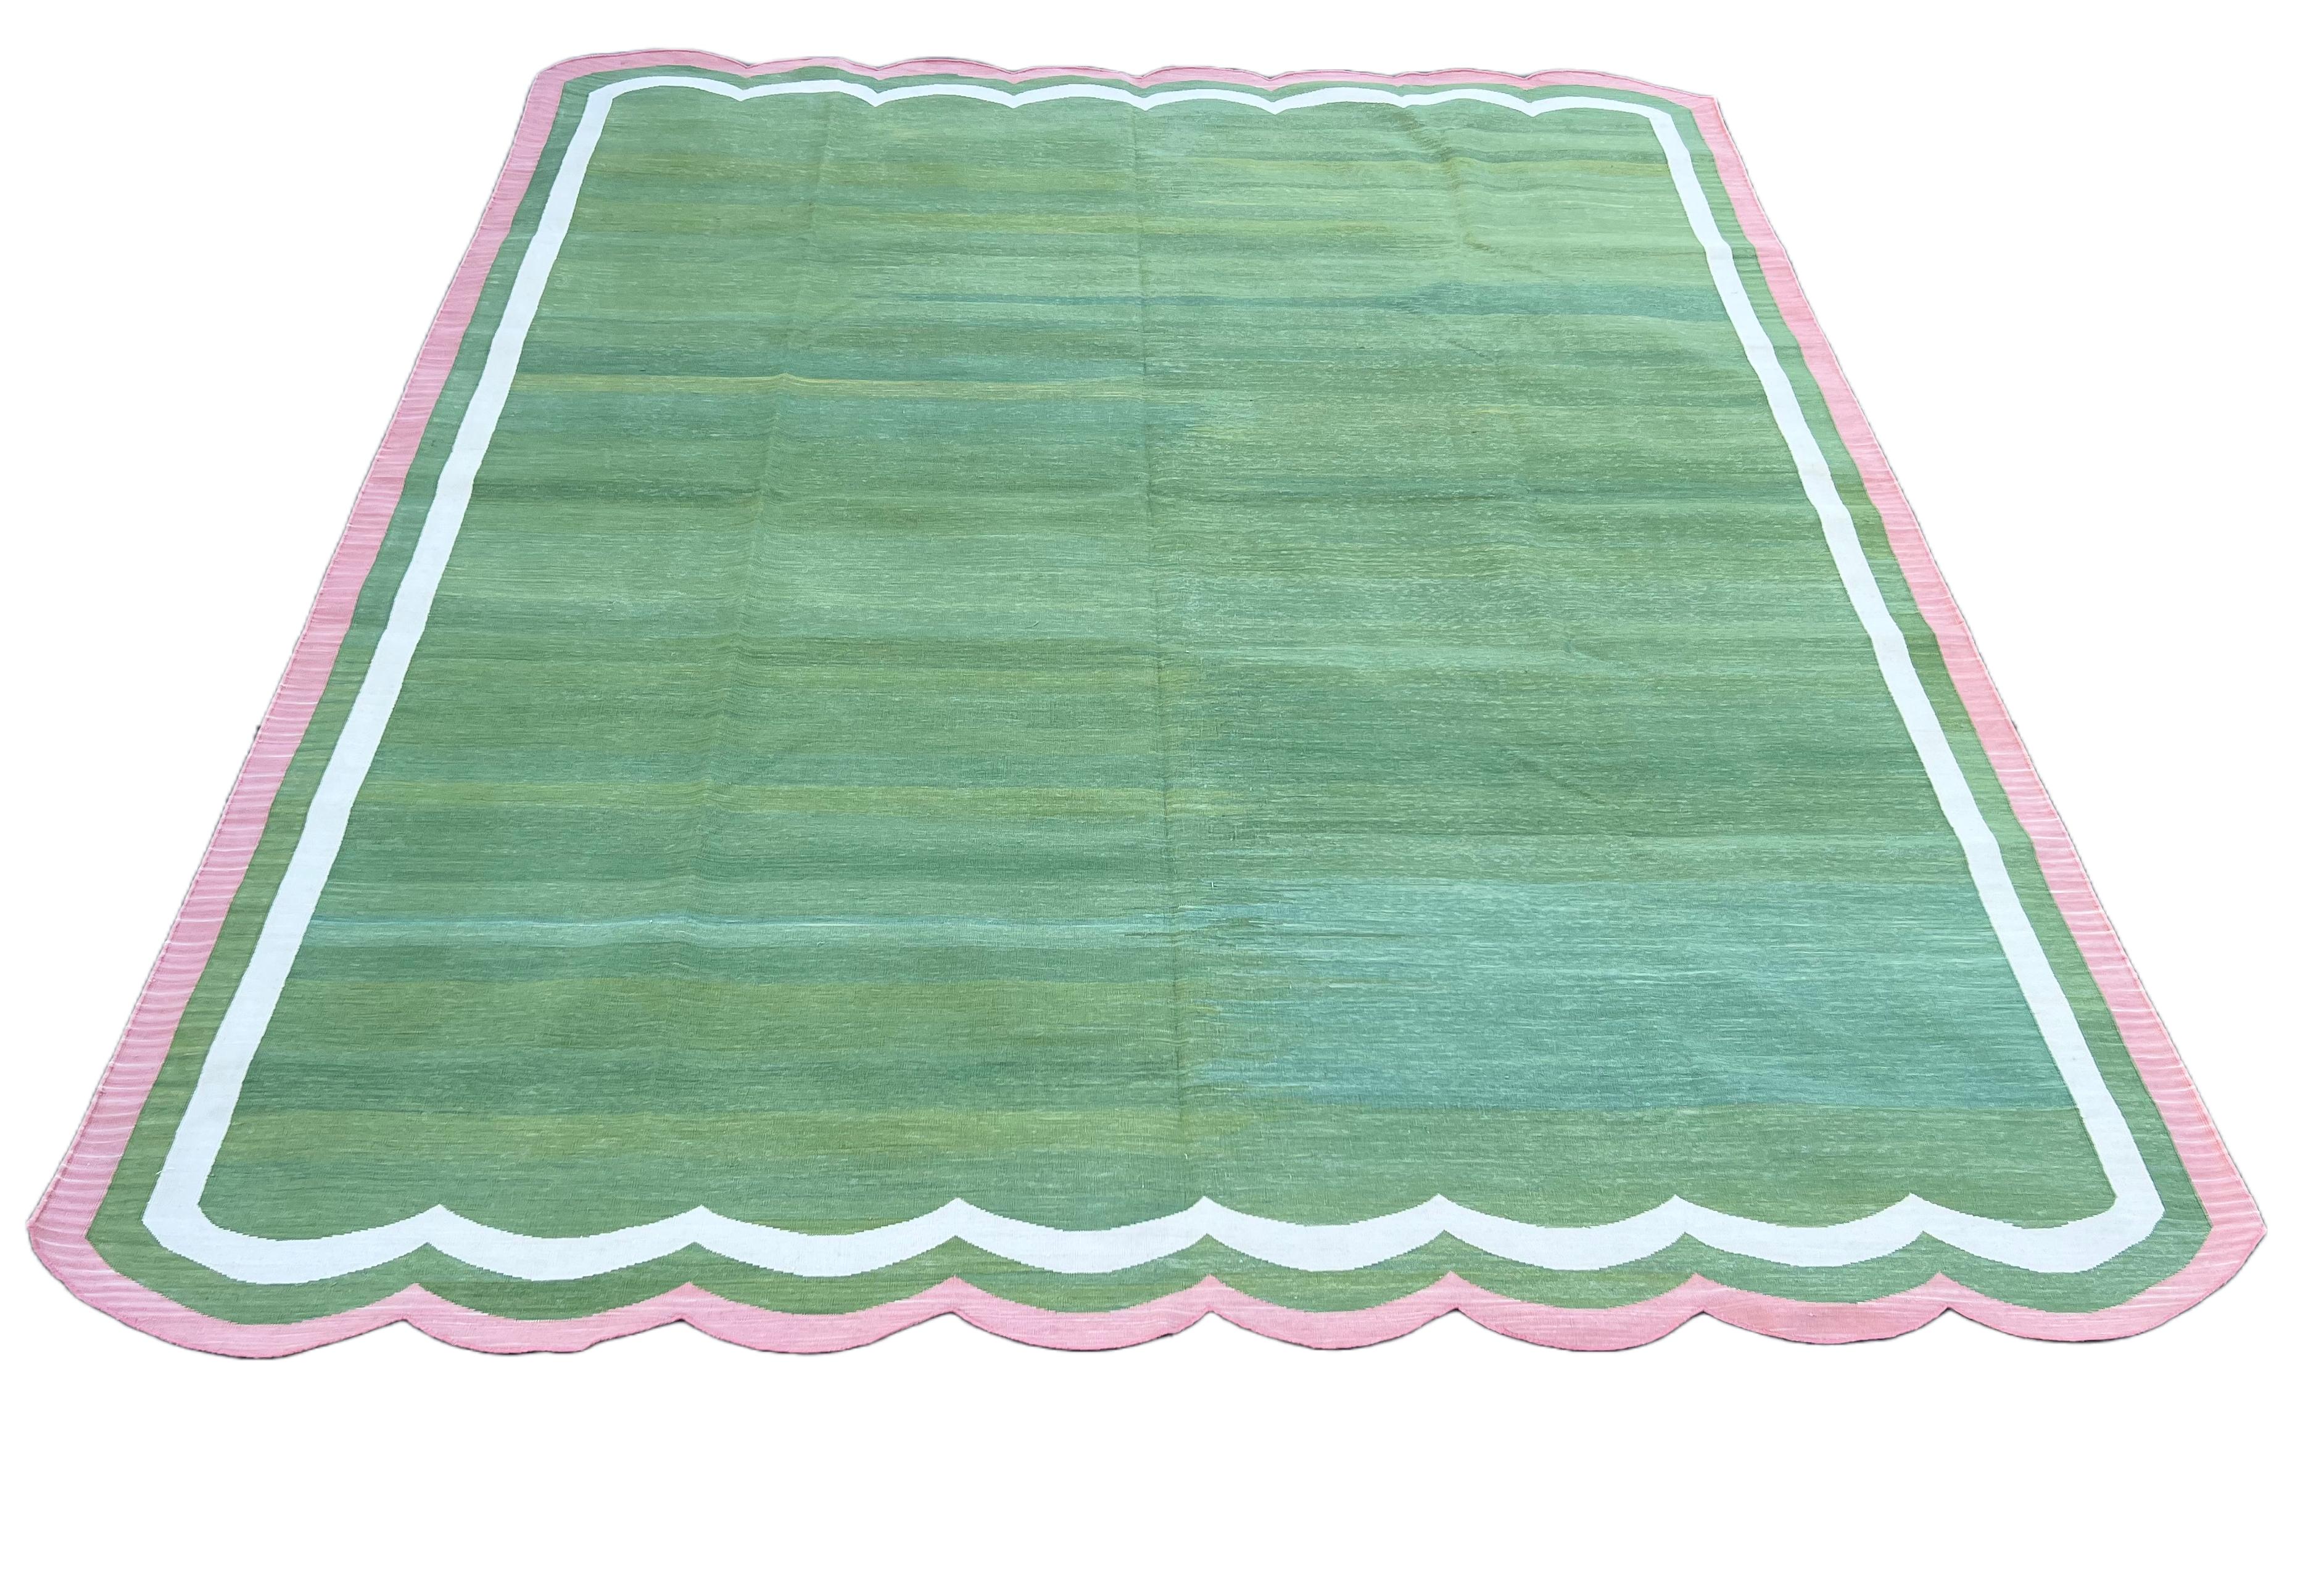 Handmade Cotton Area Flat Weave Rug, 8x10 Green And Pink Scallop Striped Dhurrie For Sale 3